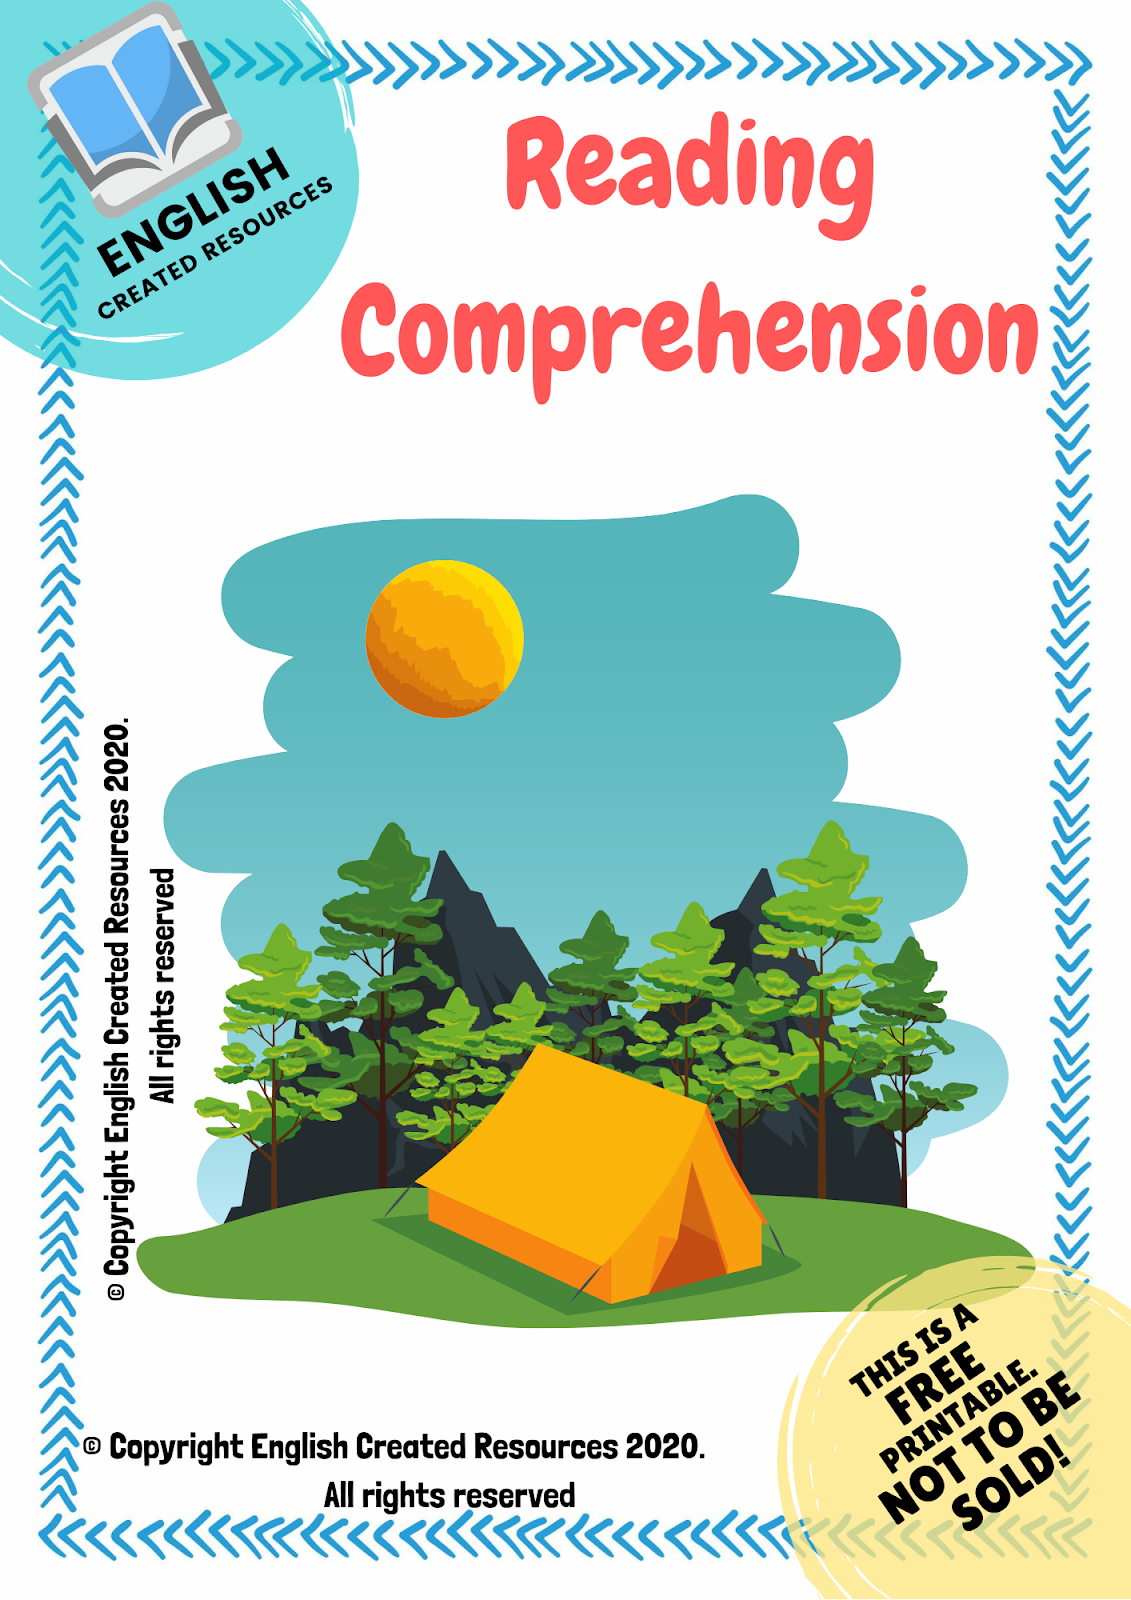 reading-comprehension-worksheets-english-created-resources